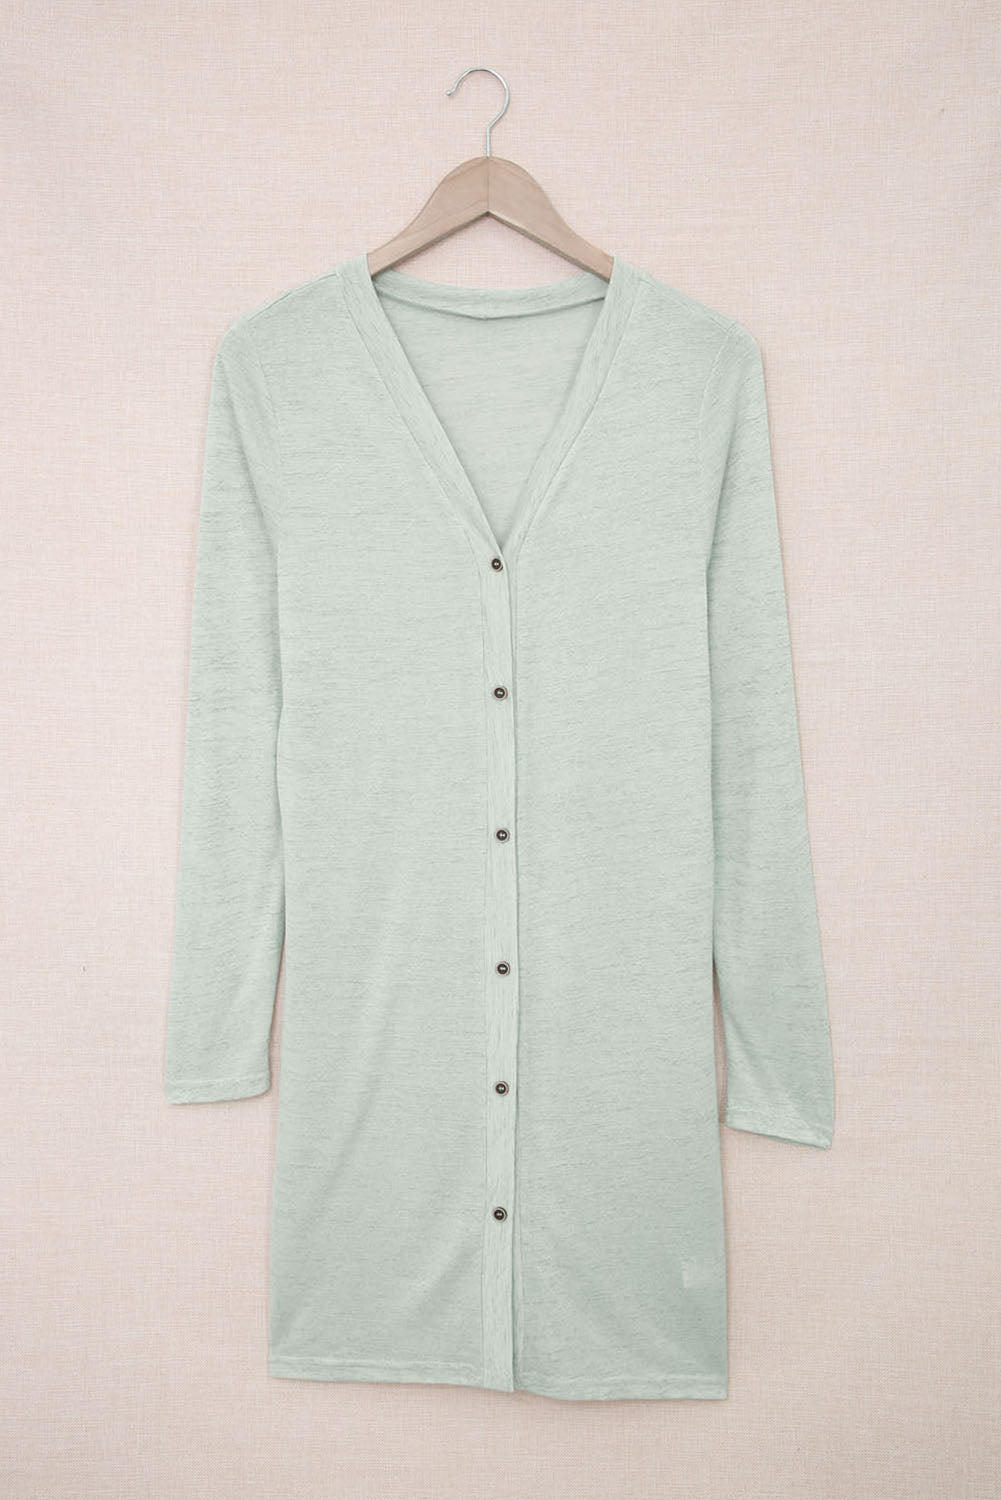 Cali Chic Solid Color Open Front Buttons Cardigan Lt Green